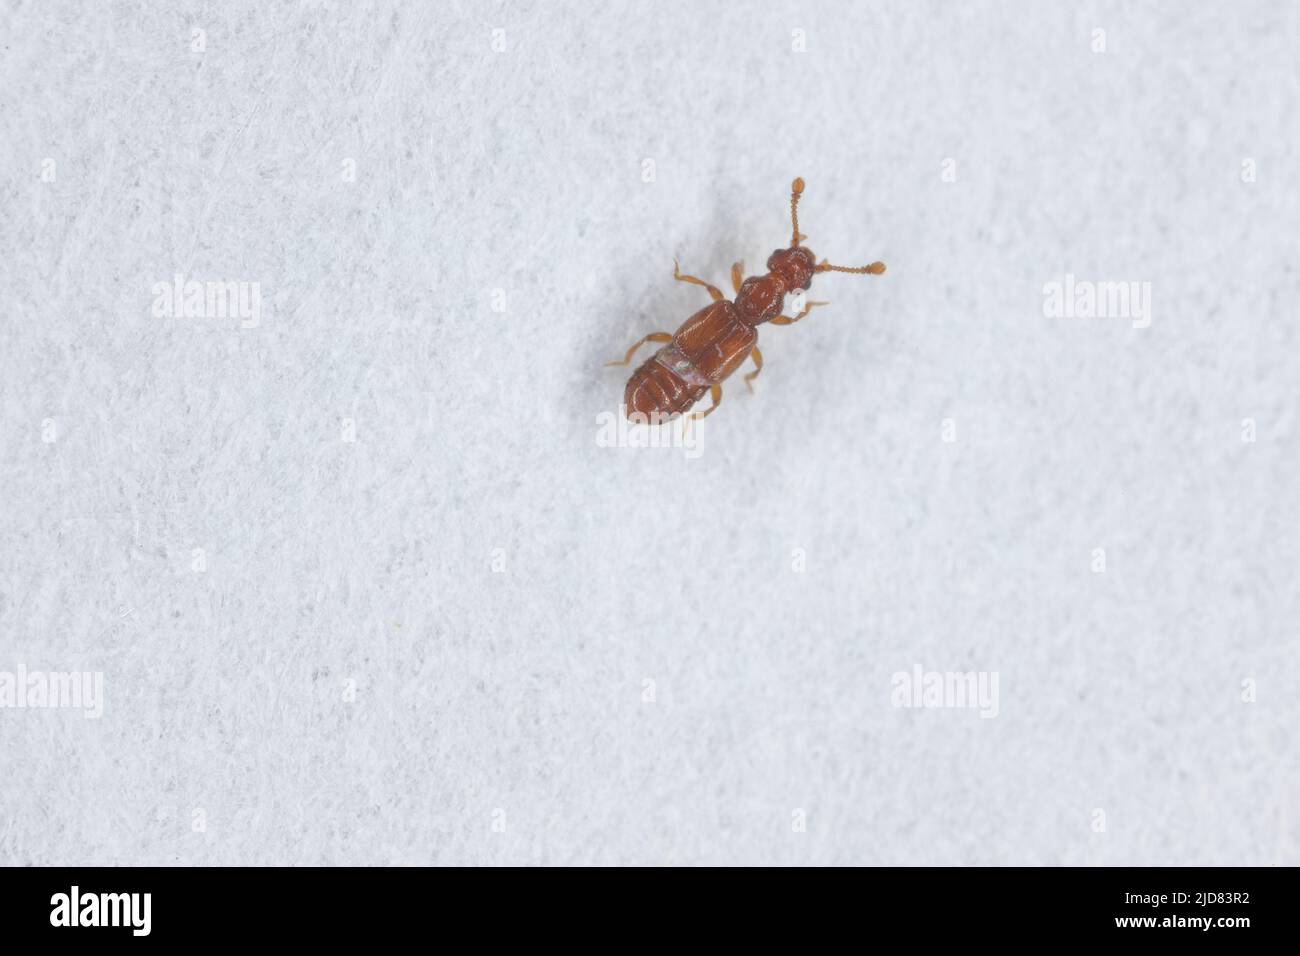 Tiny beetle Euplectus is a genus of ant-loving beetles in the family Staphylinidae. There are about 13 described species in Euplectus. Insect on paper Stock Photo